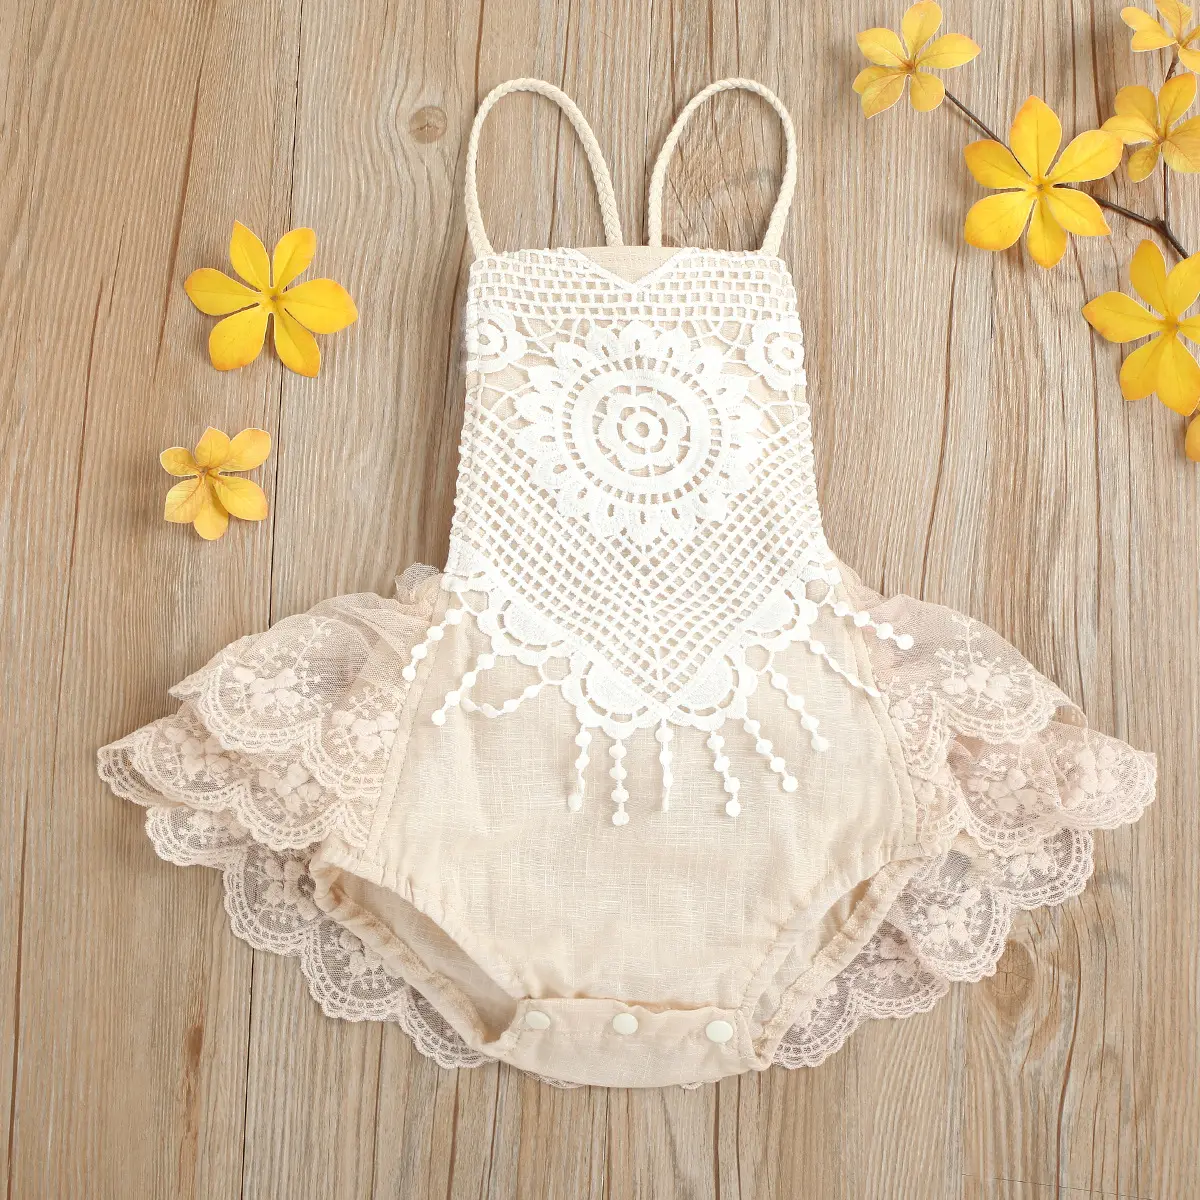 Children's Wear Baby One Piece Suit with Net Gauze Lace Baby Triangle Climbing Suit Summer Romper New Born Baby Clothes